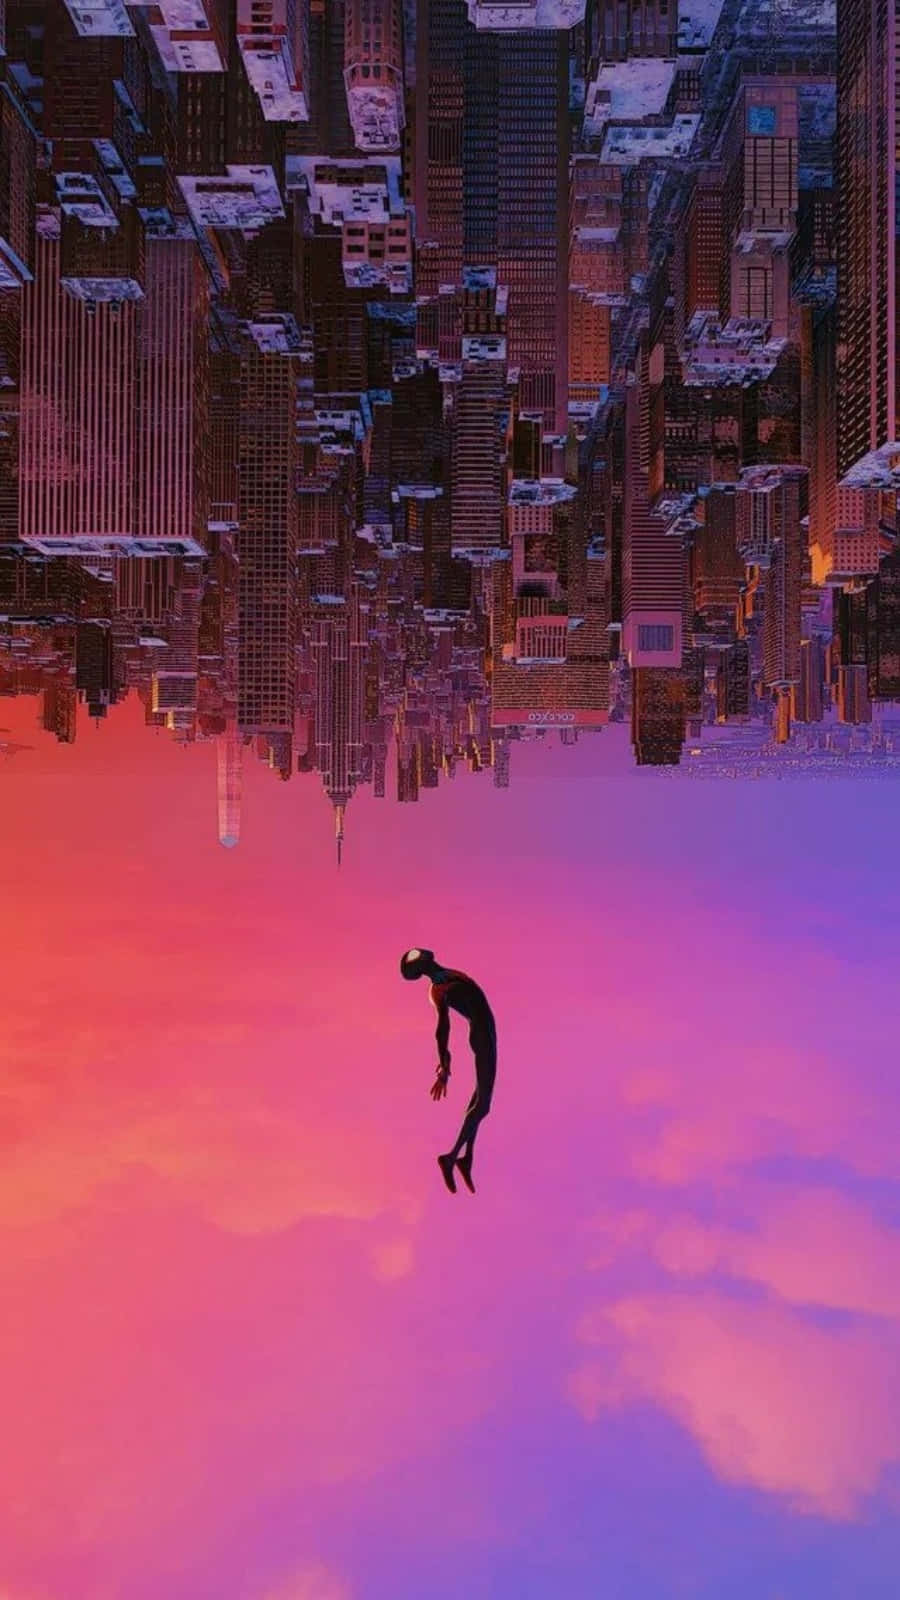 A Man Is Jumping Over A City At Sunset